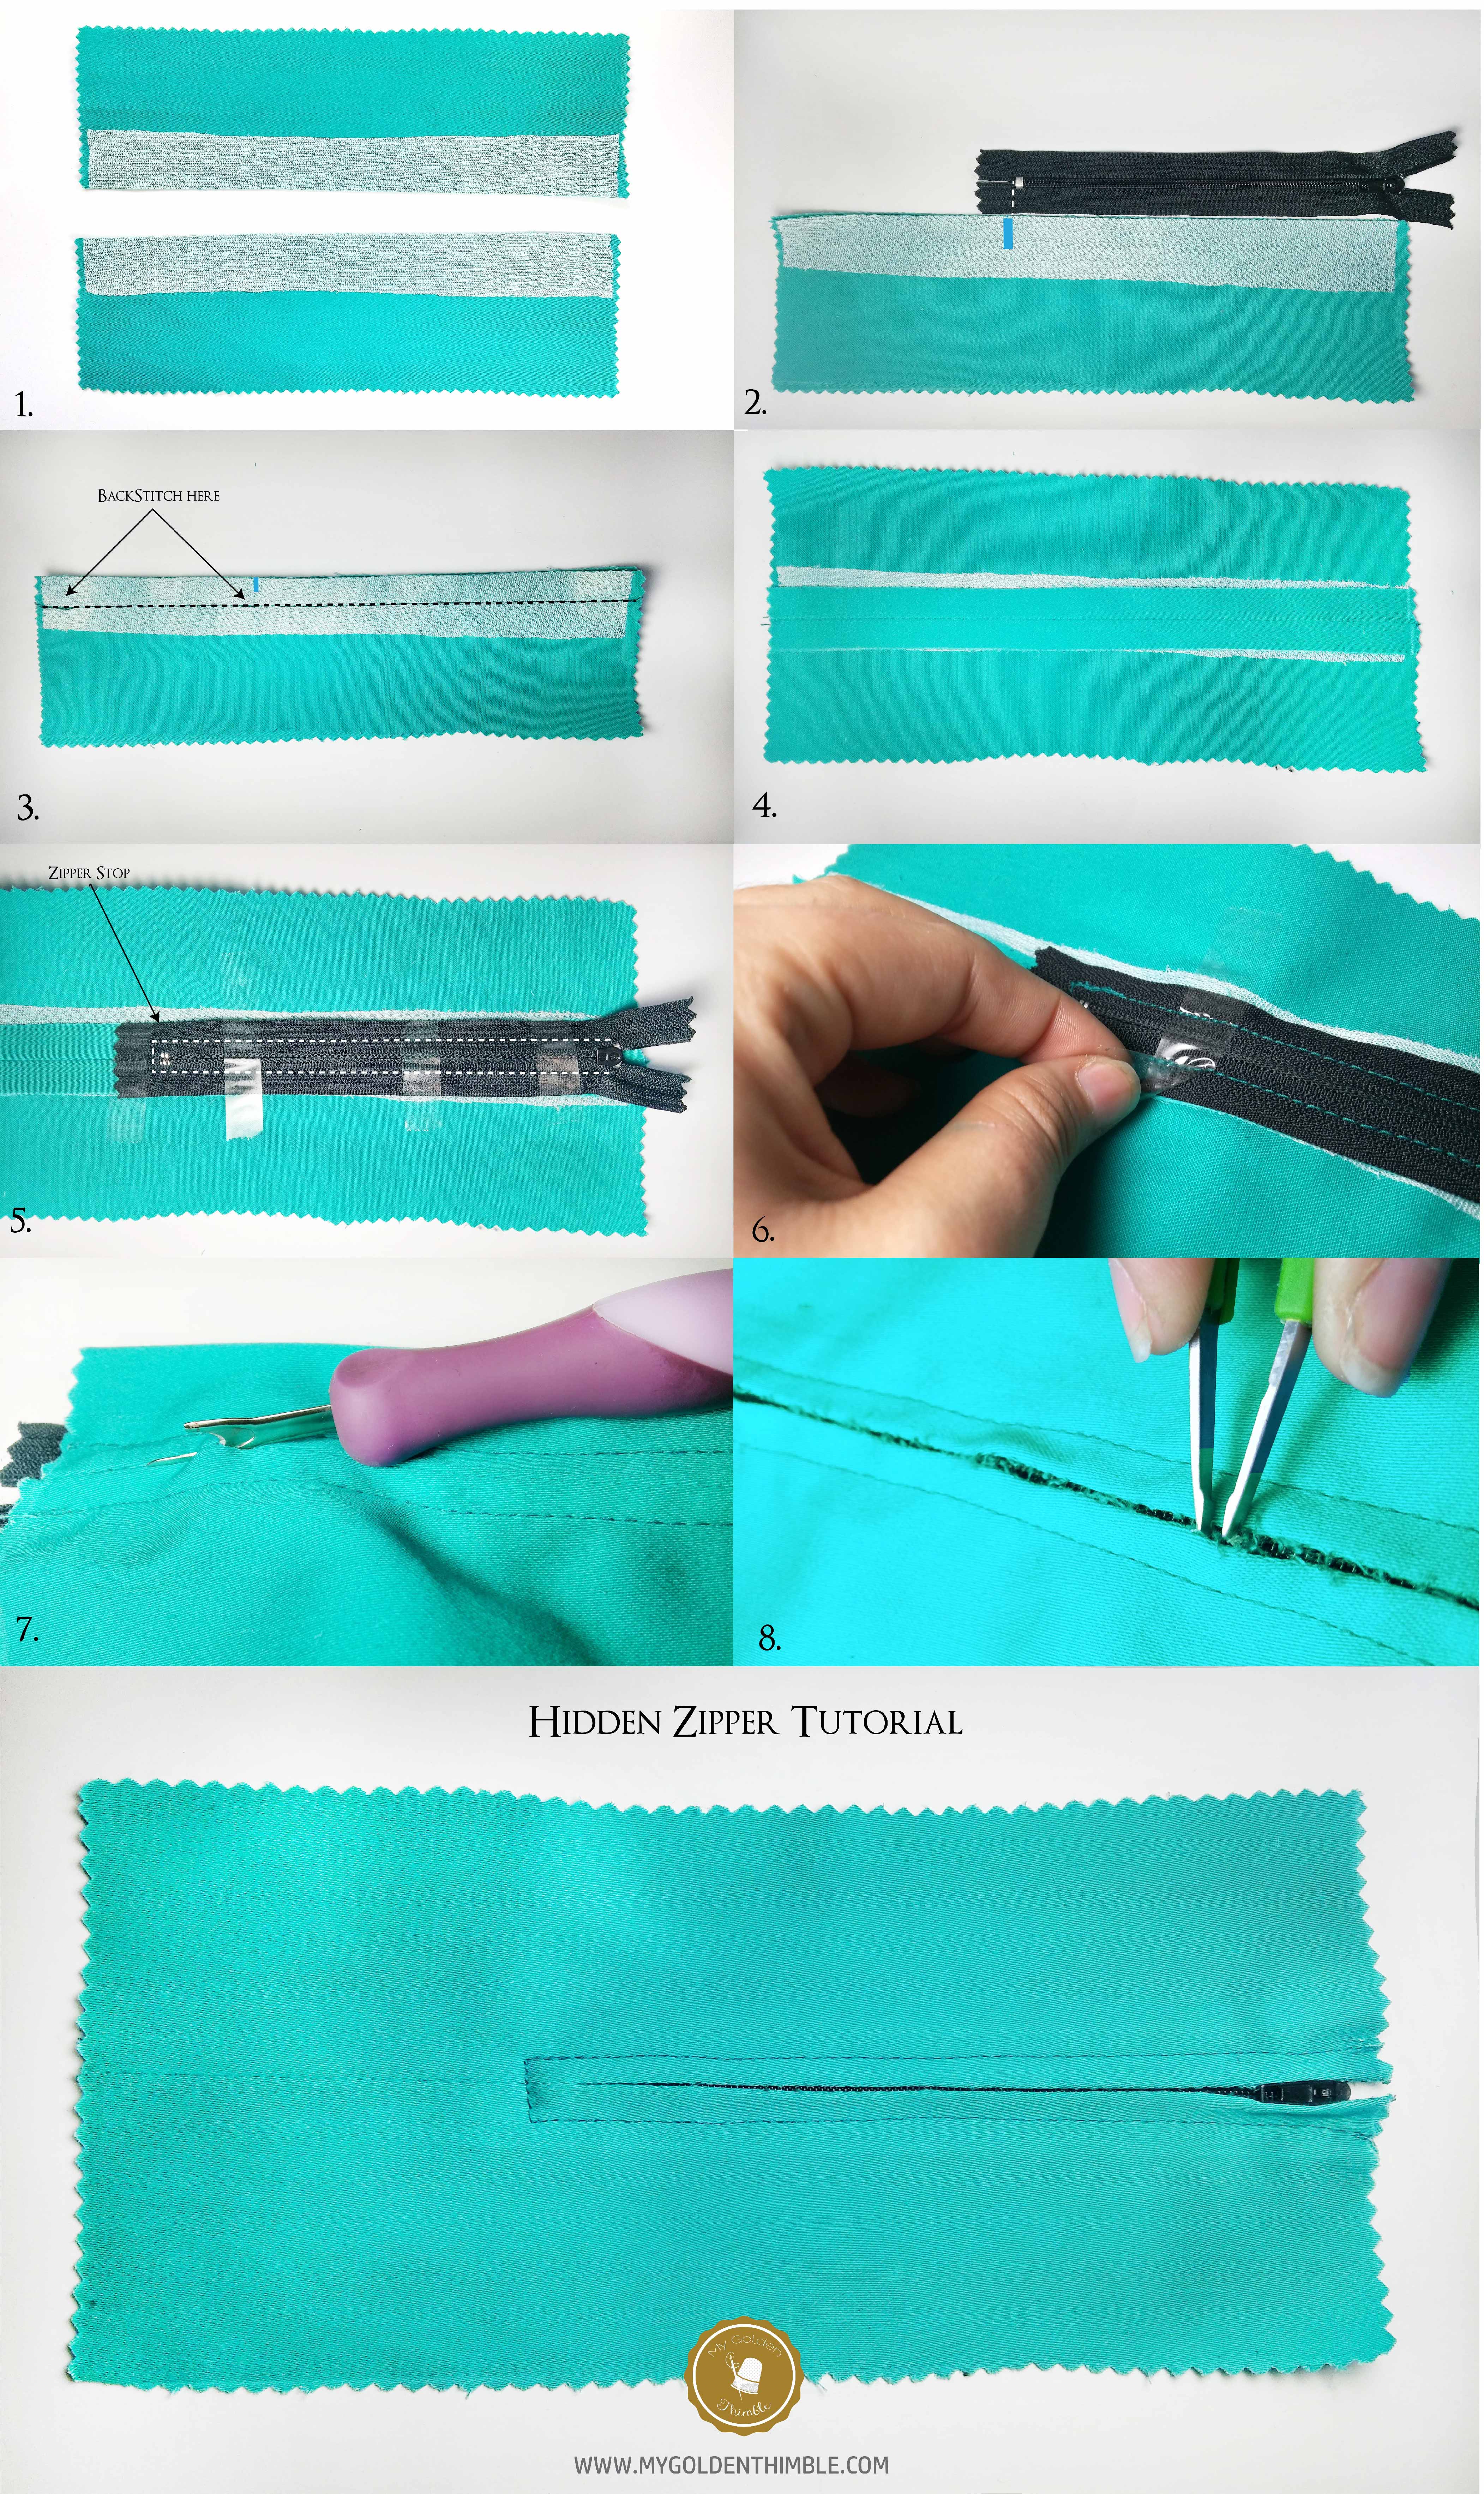 Tutorial: How to construct a zipper pocket - Infectious Stitches